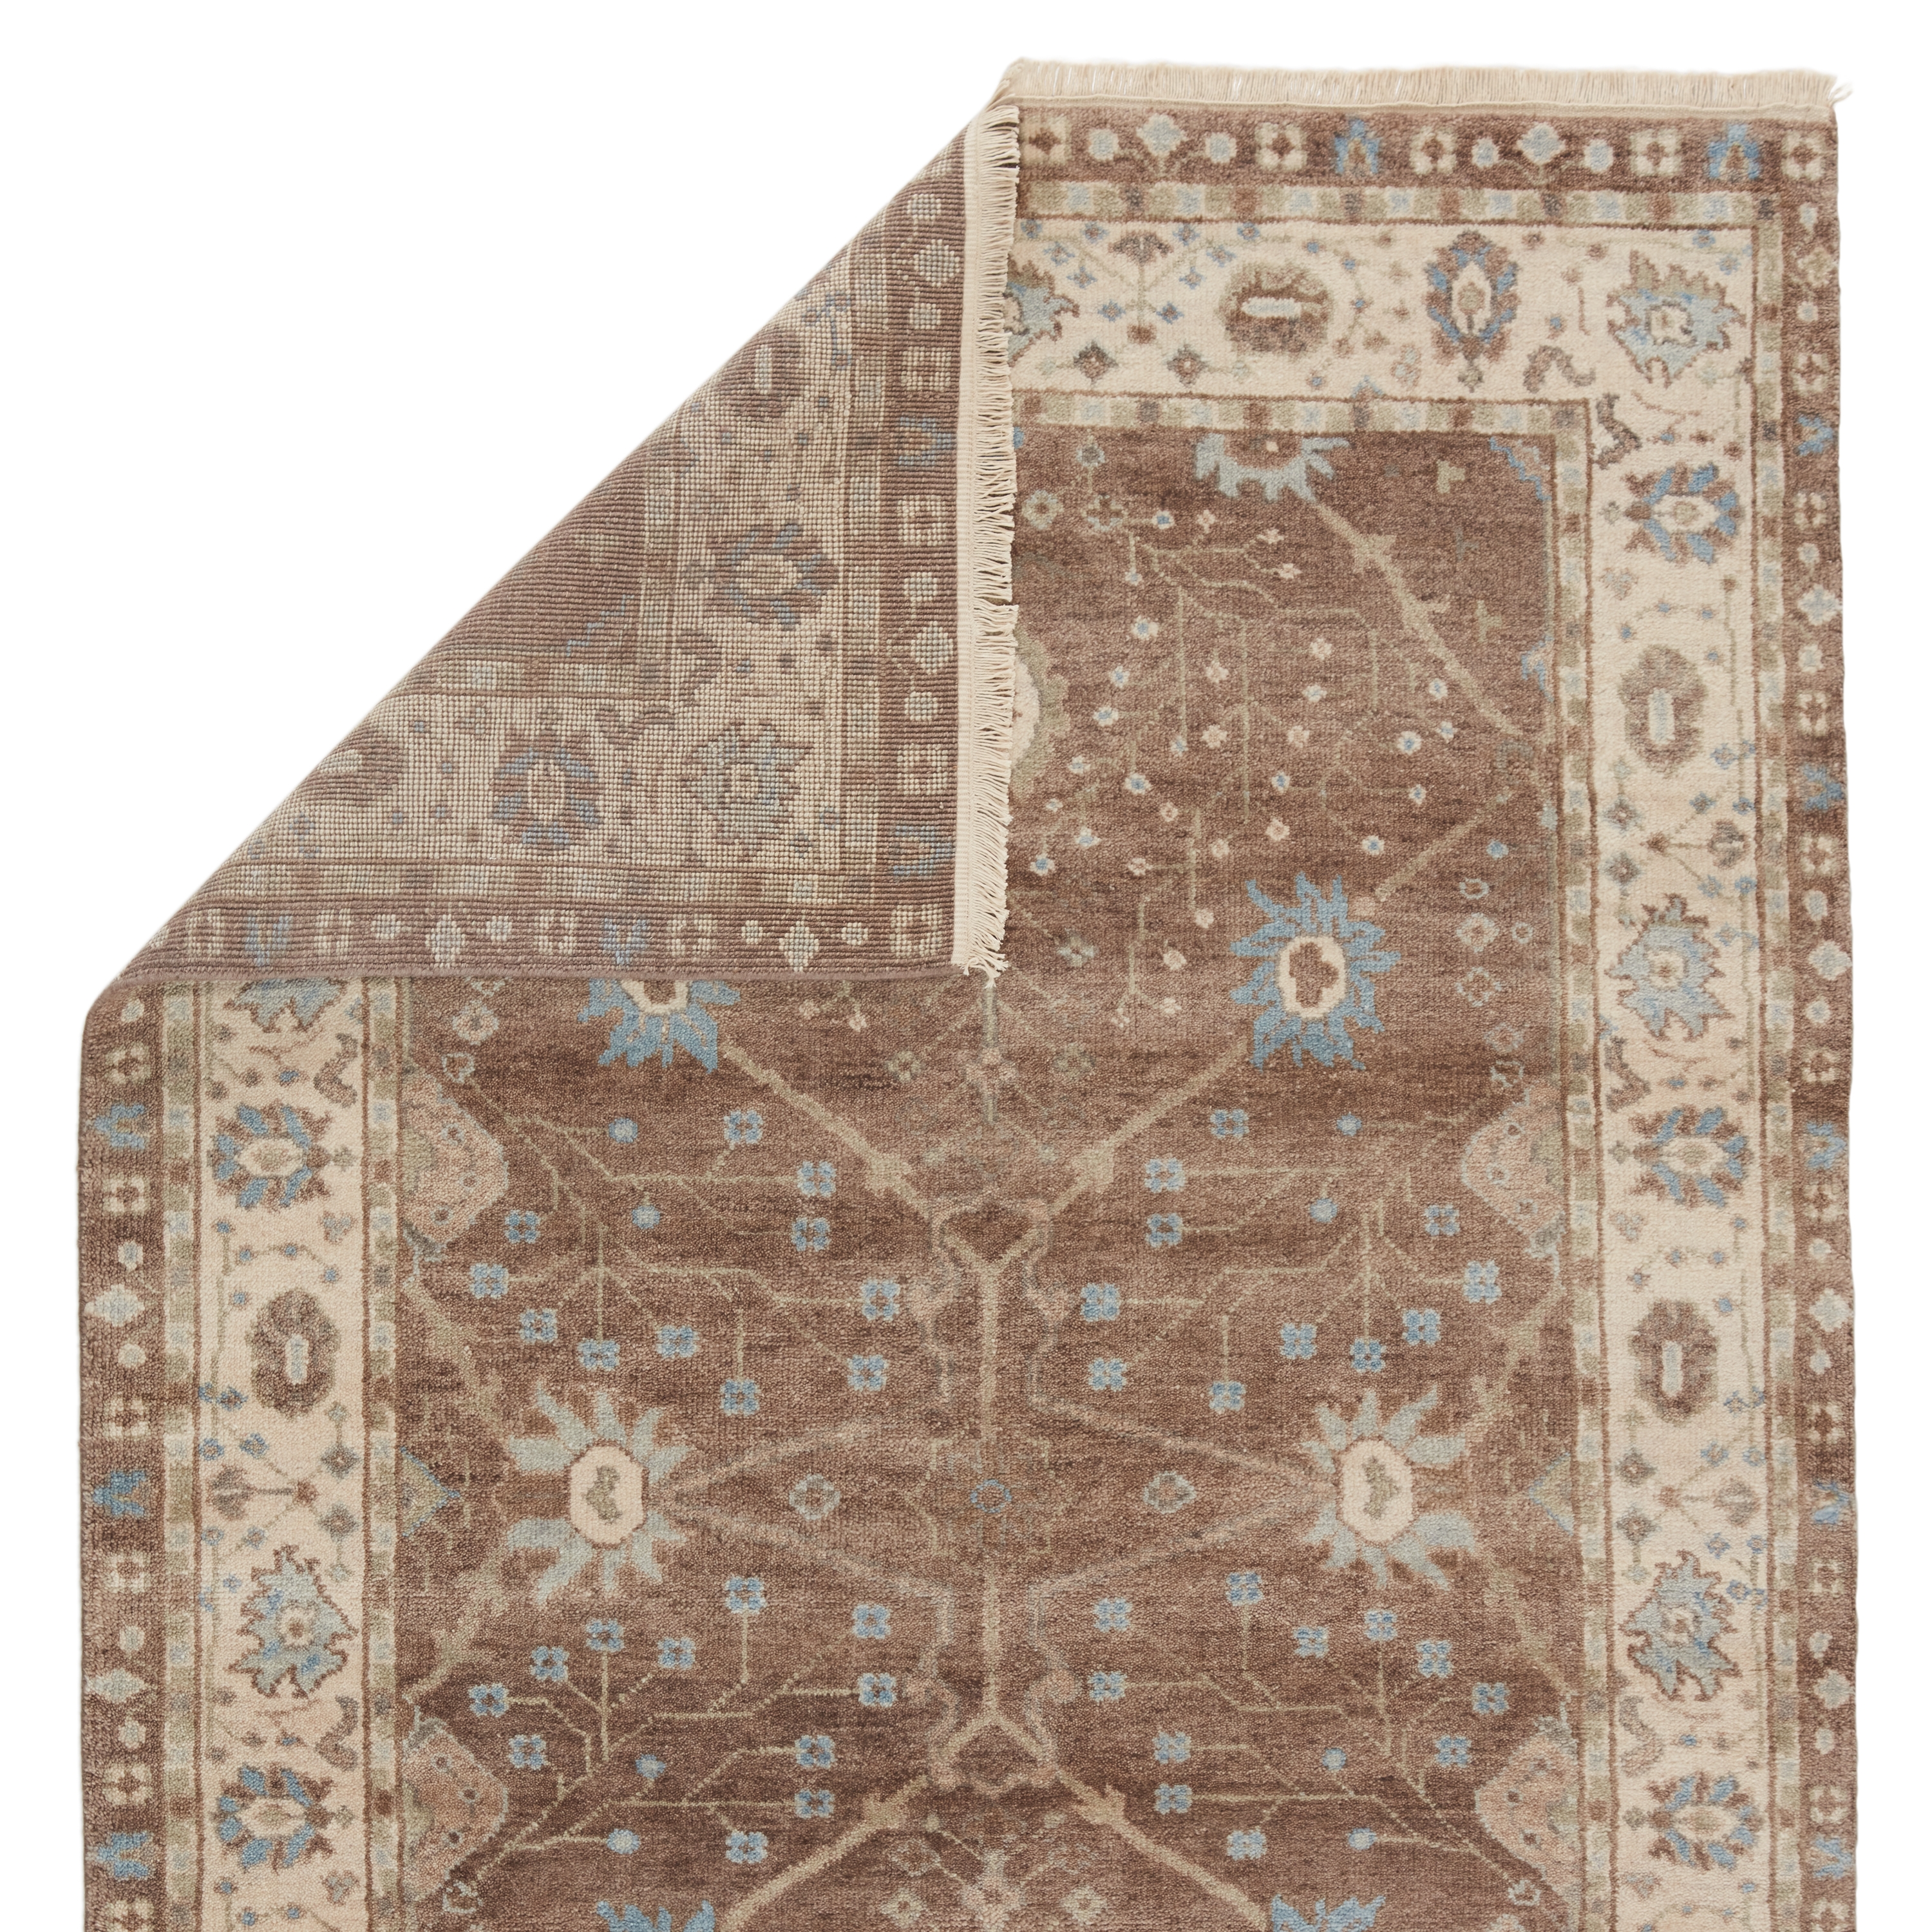 Princeton Hand-Knotted Floral Tan/ Light Blue Area Rug (2'X3') - Image 2